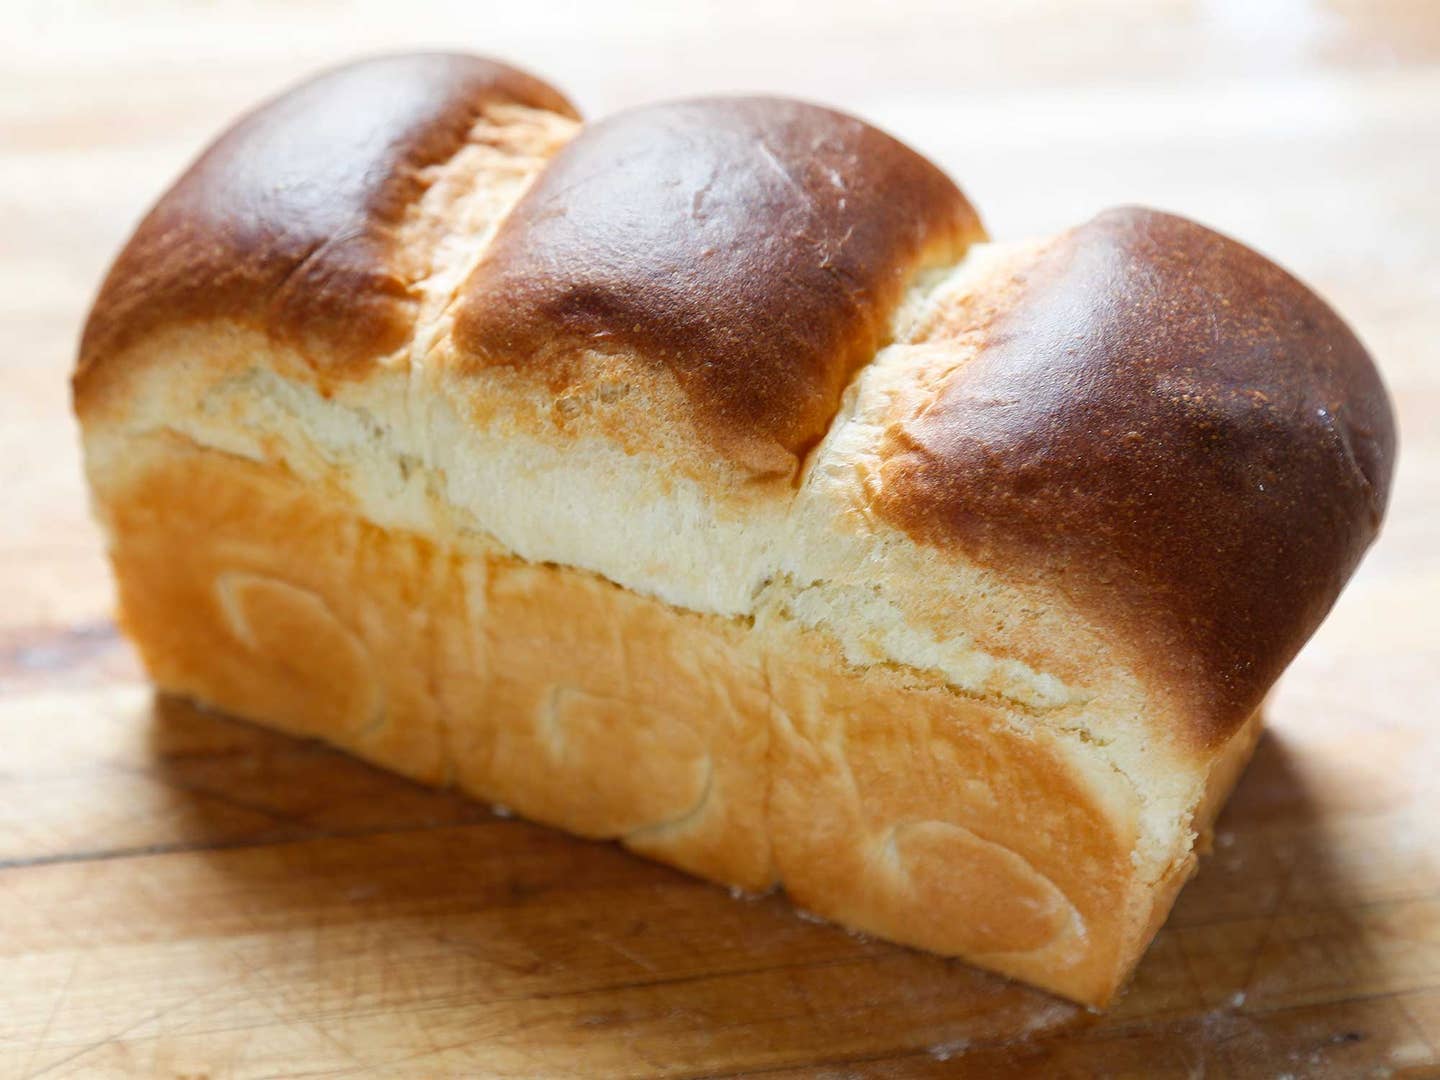 We Can Now Quantify the Carbon Footprint of a Loaf of Bread